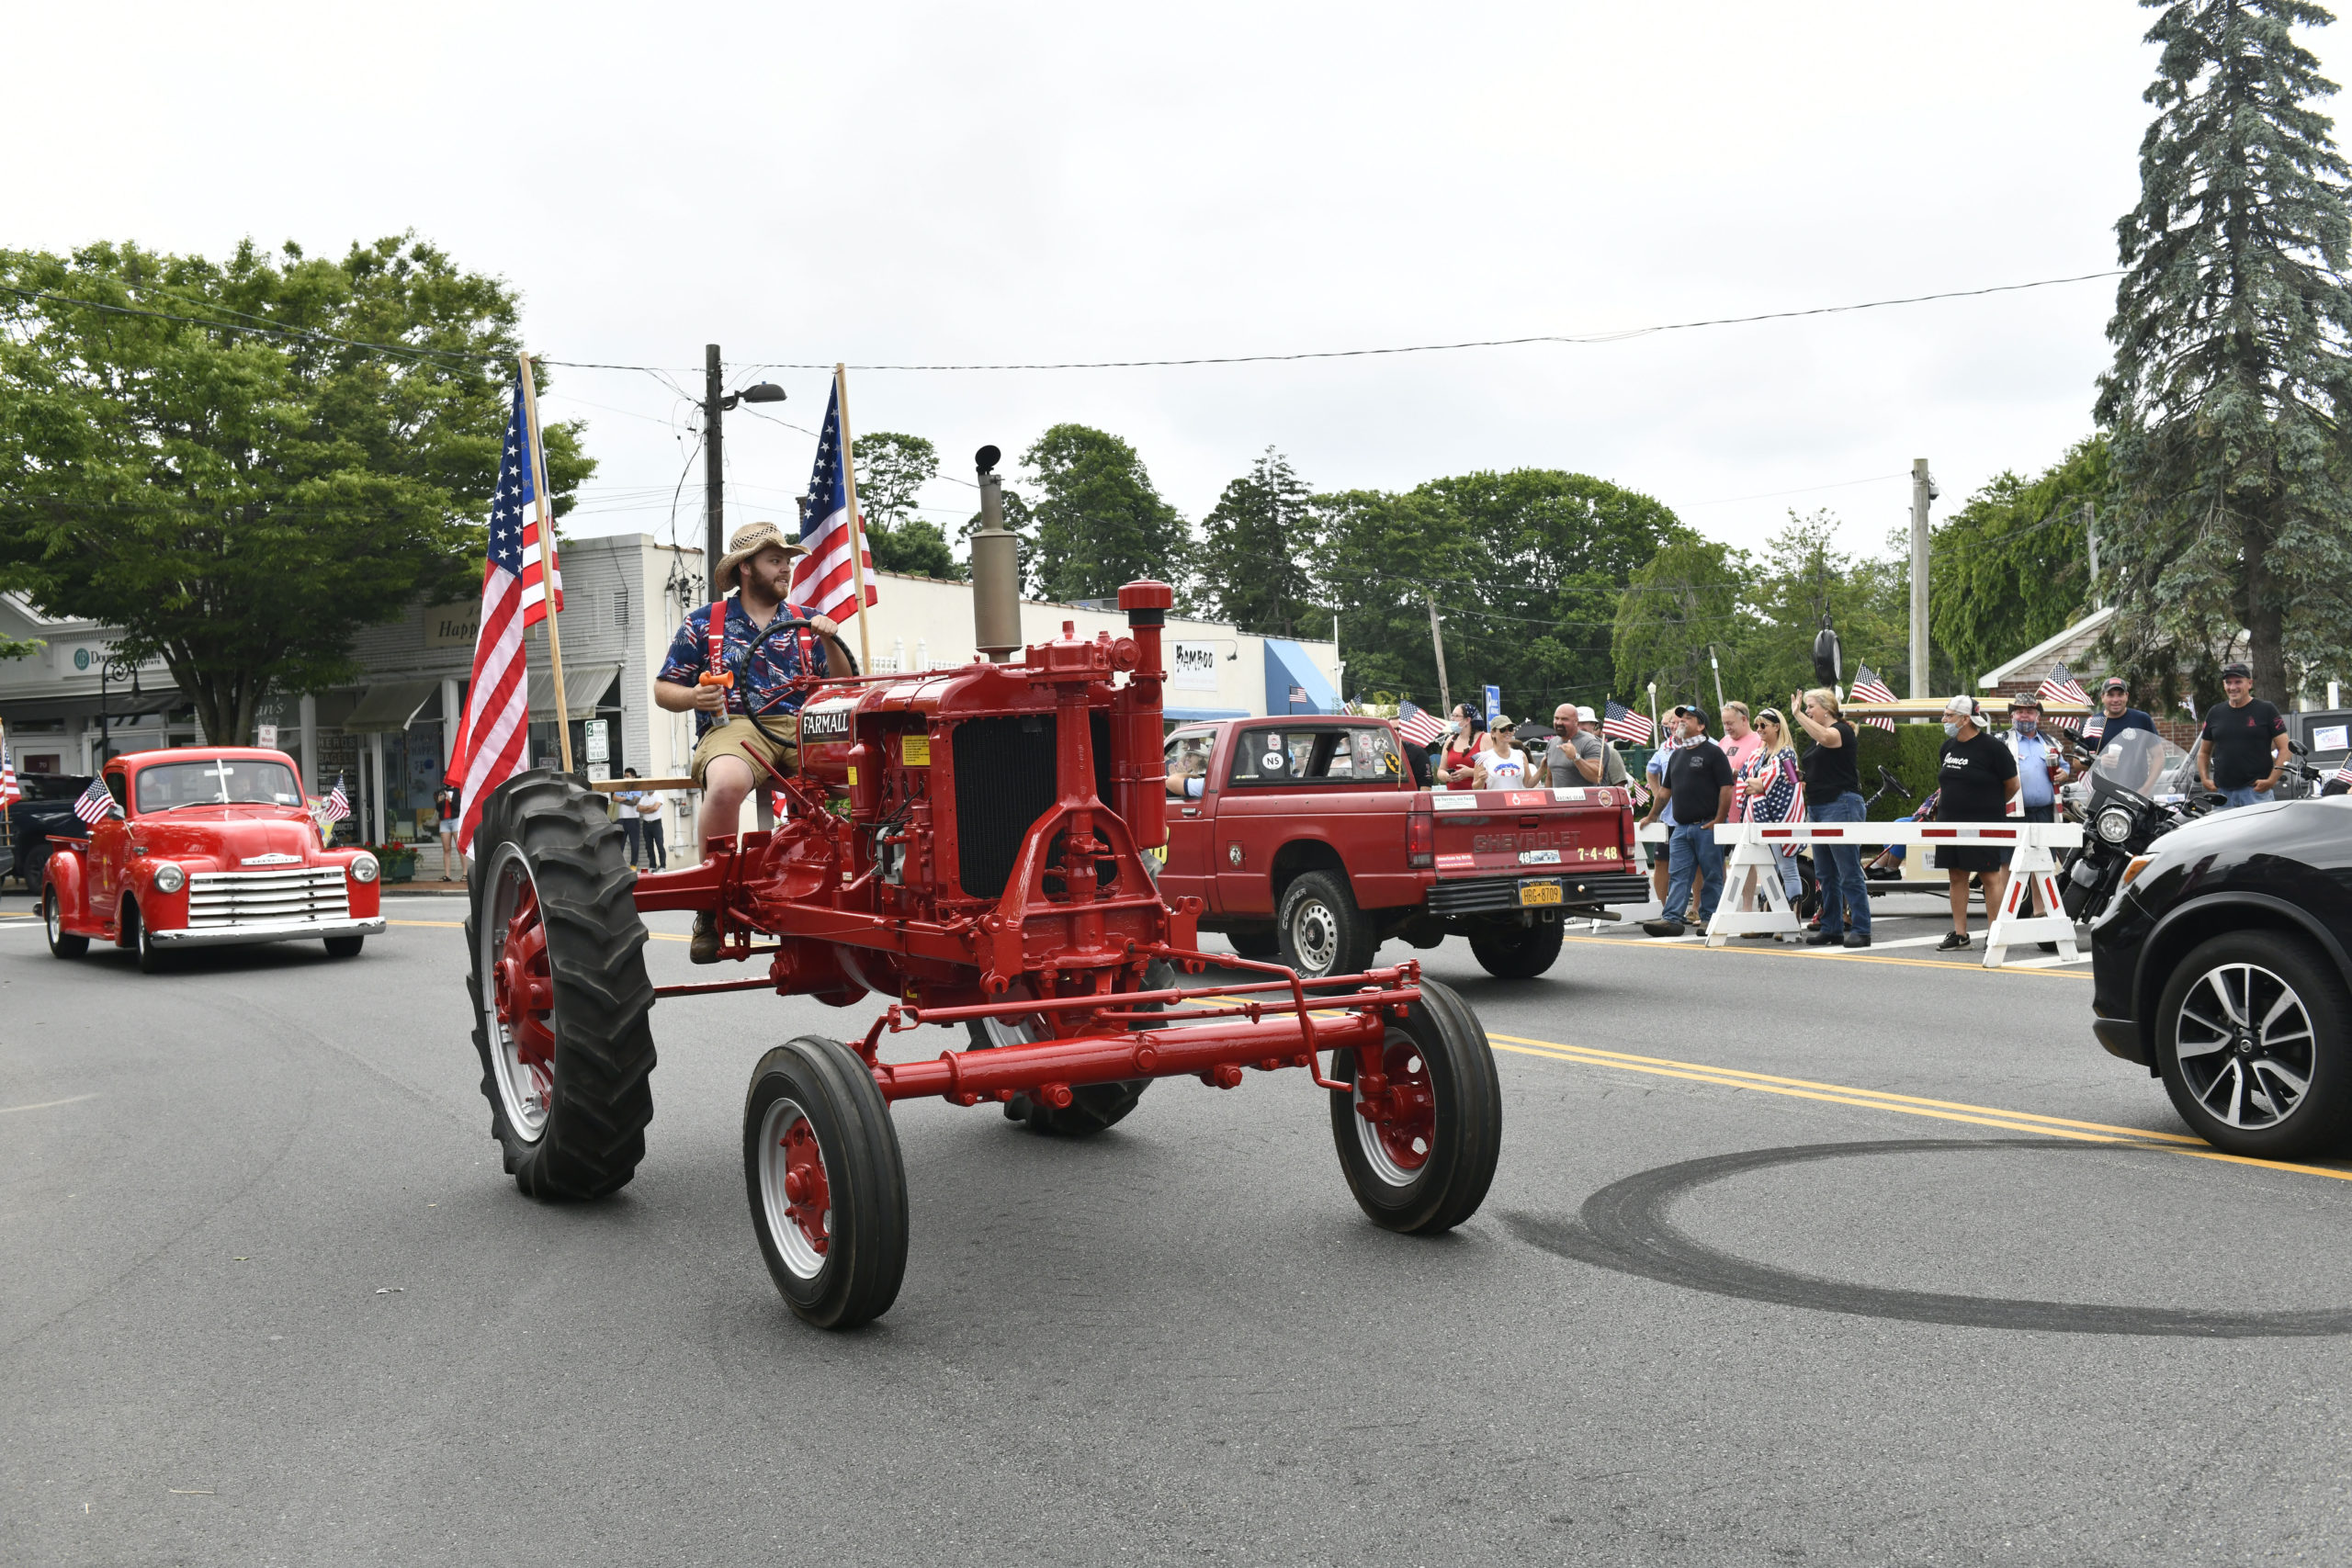 The parade in Southampton Village on Saturday morning.